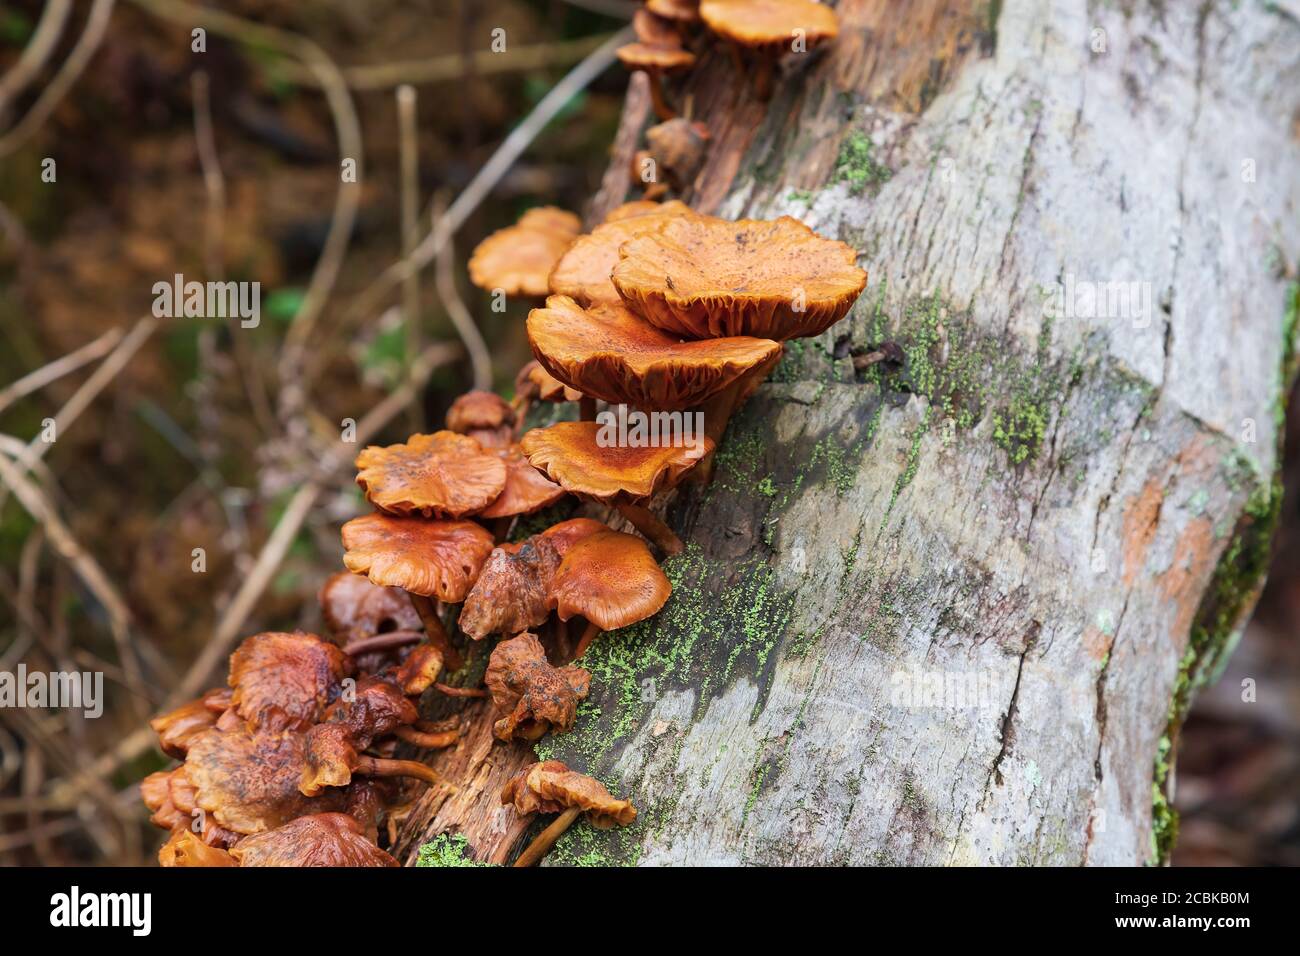 Mushrooms growing on a decaying coconut tree trunk with mold and moss Stock Photo